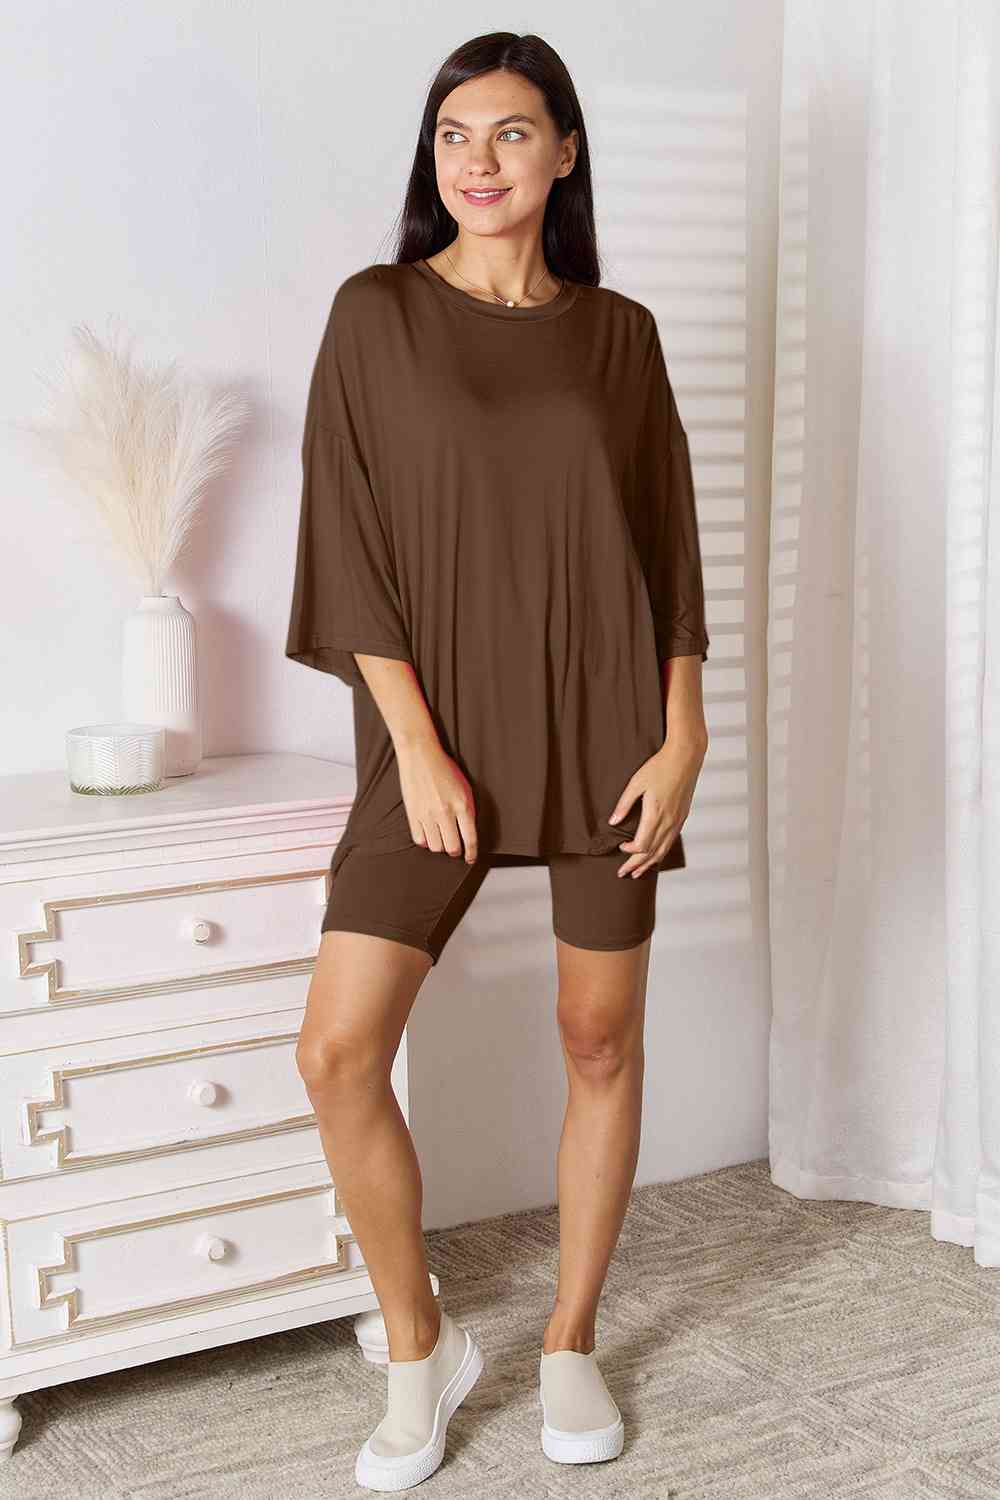 Soft Rayon Three-Quarter Sleeve Top and Shorts Set - Camis & Tops - Outfit Sets - 4 - 2024